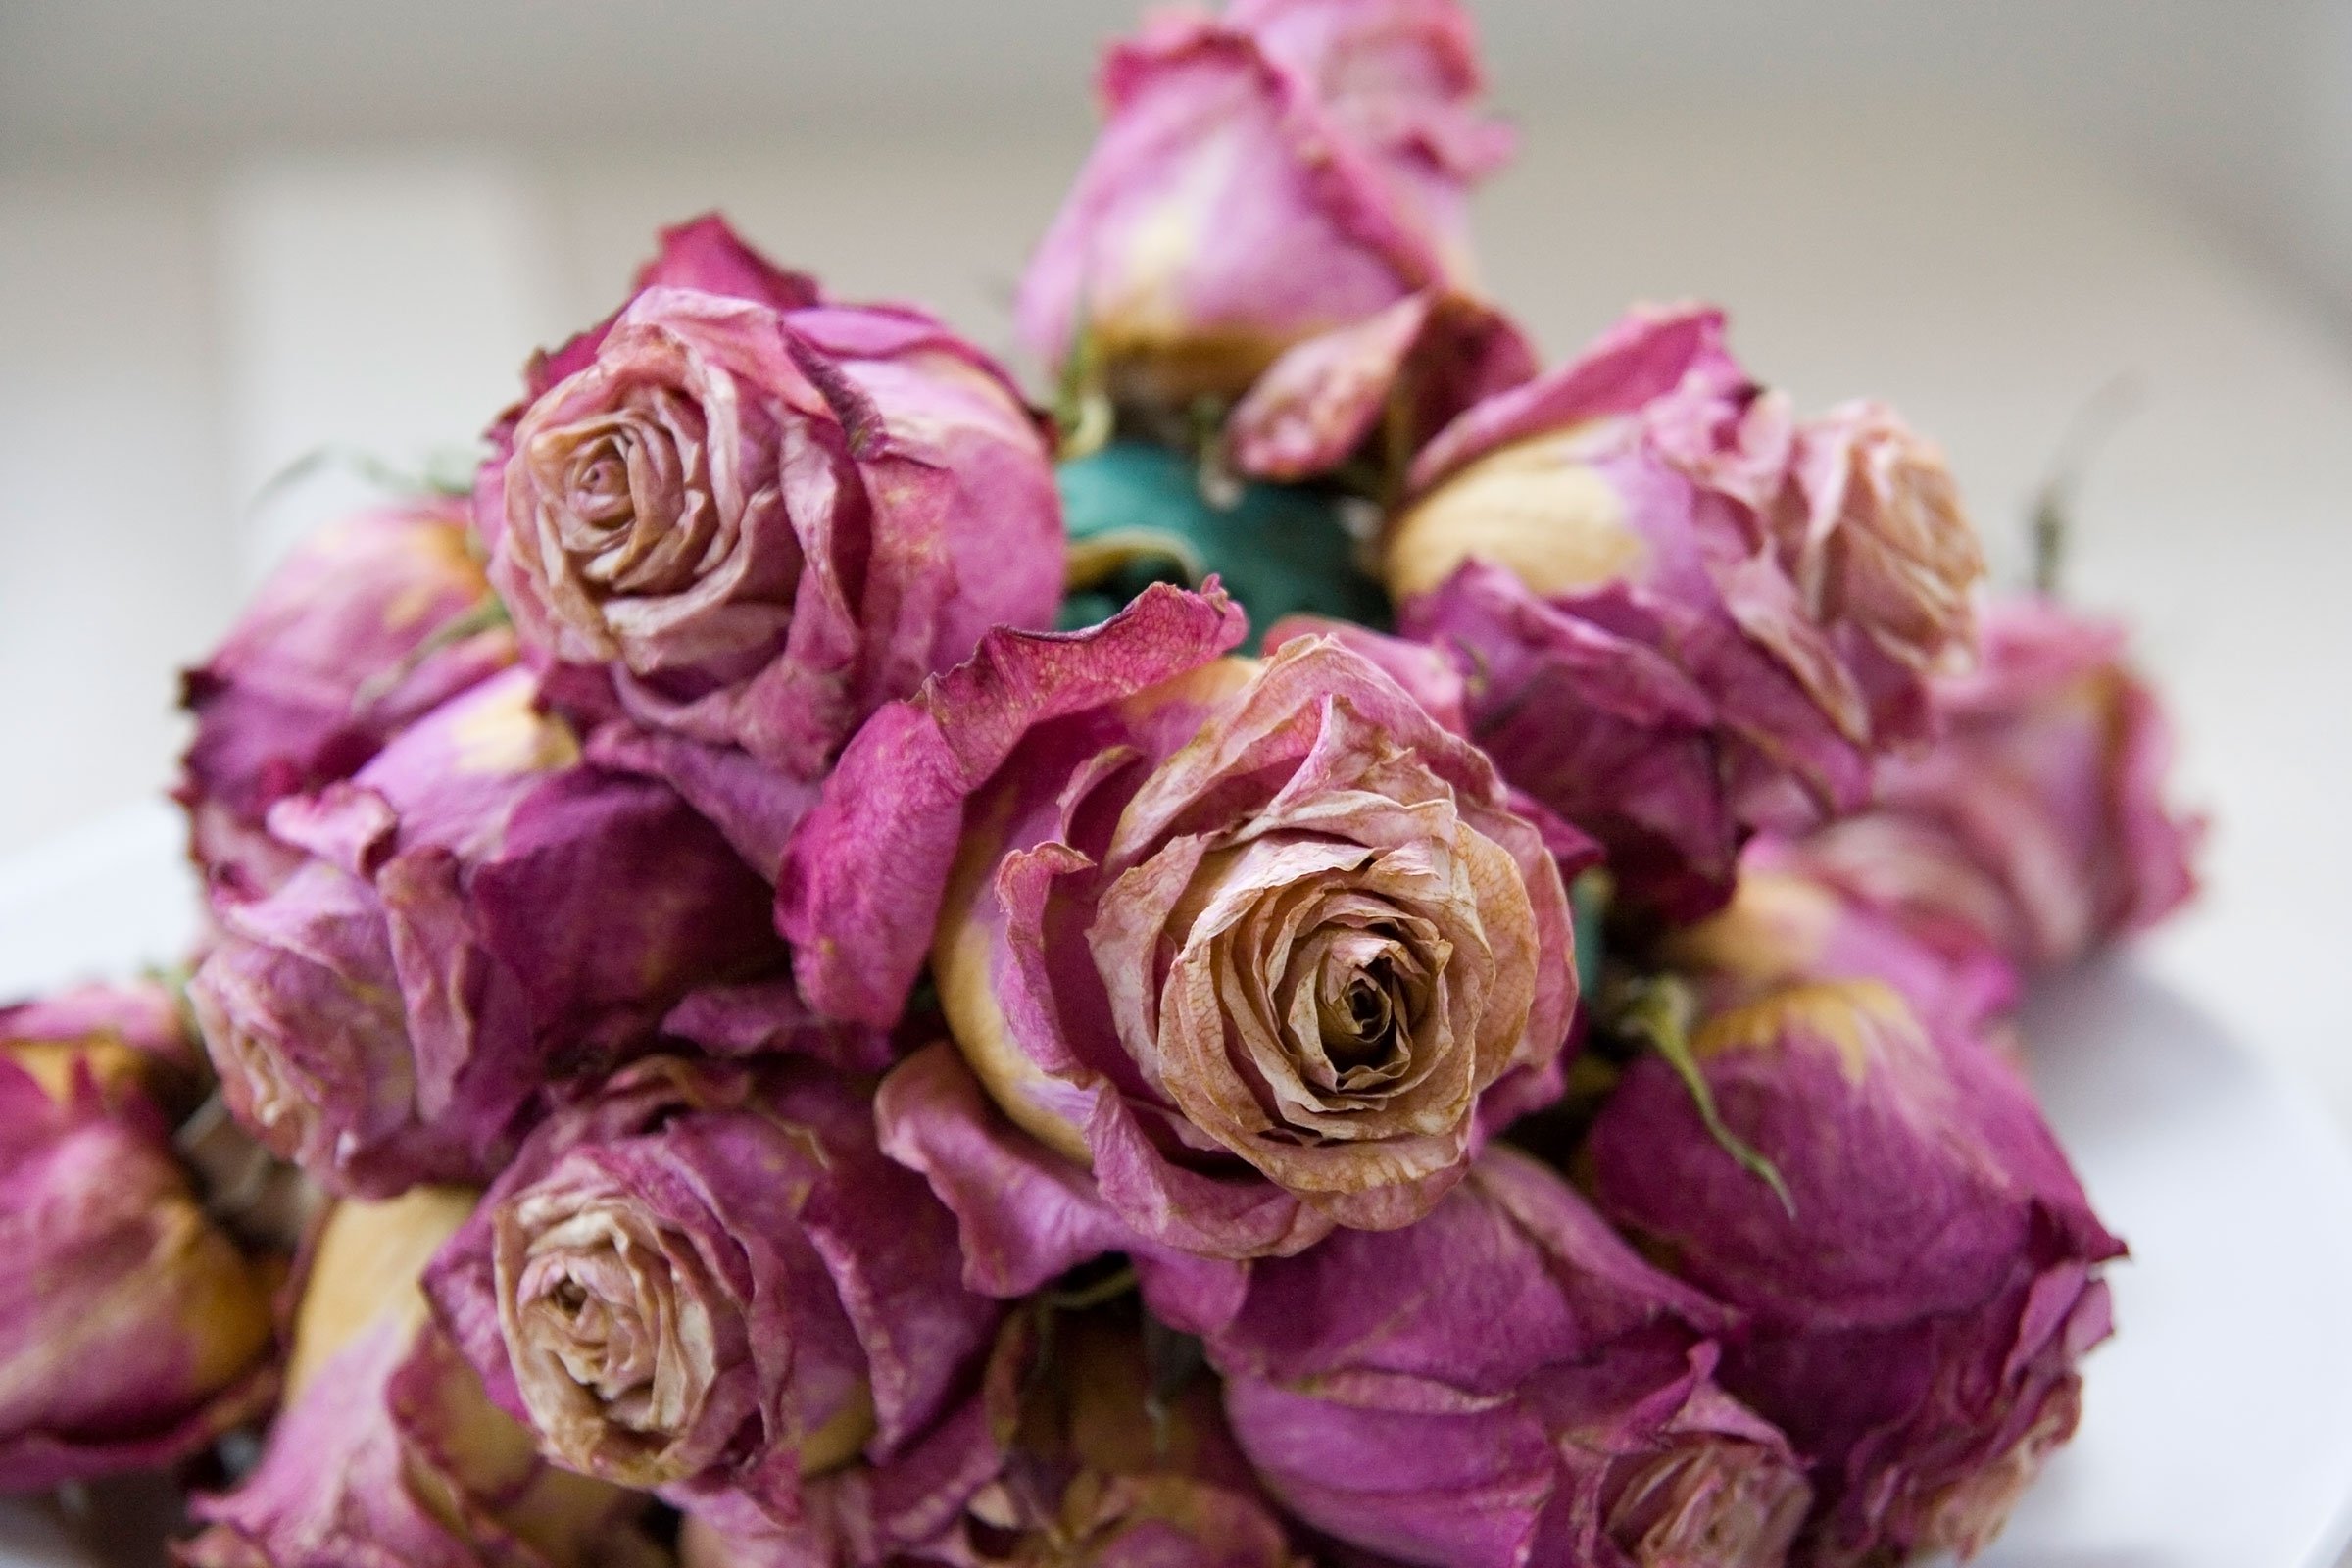 How to Dry Flowers: 5 Awesome Ways to Preserve a Bouquet | Reader's ...